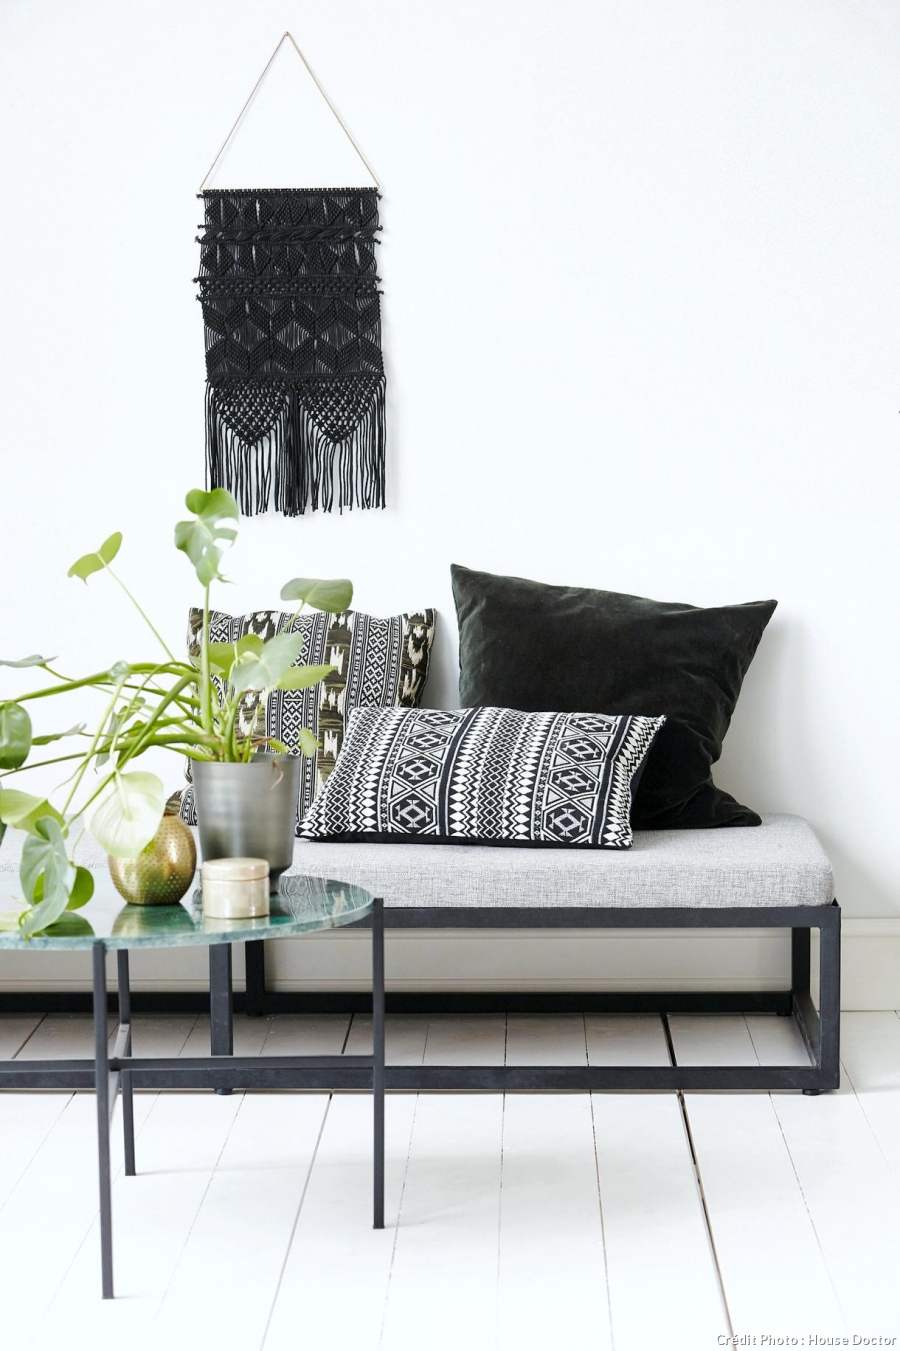 Ethnic style: our decor ideas to get in the mood